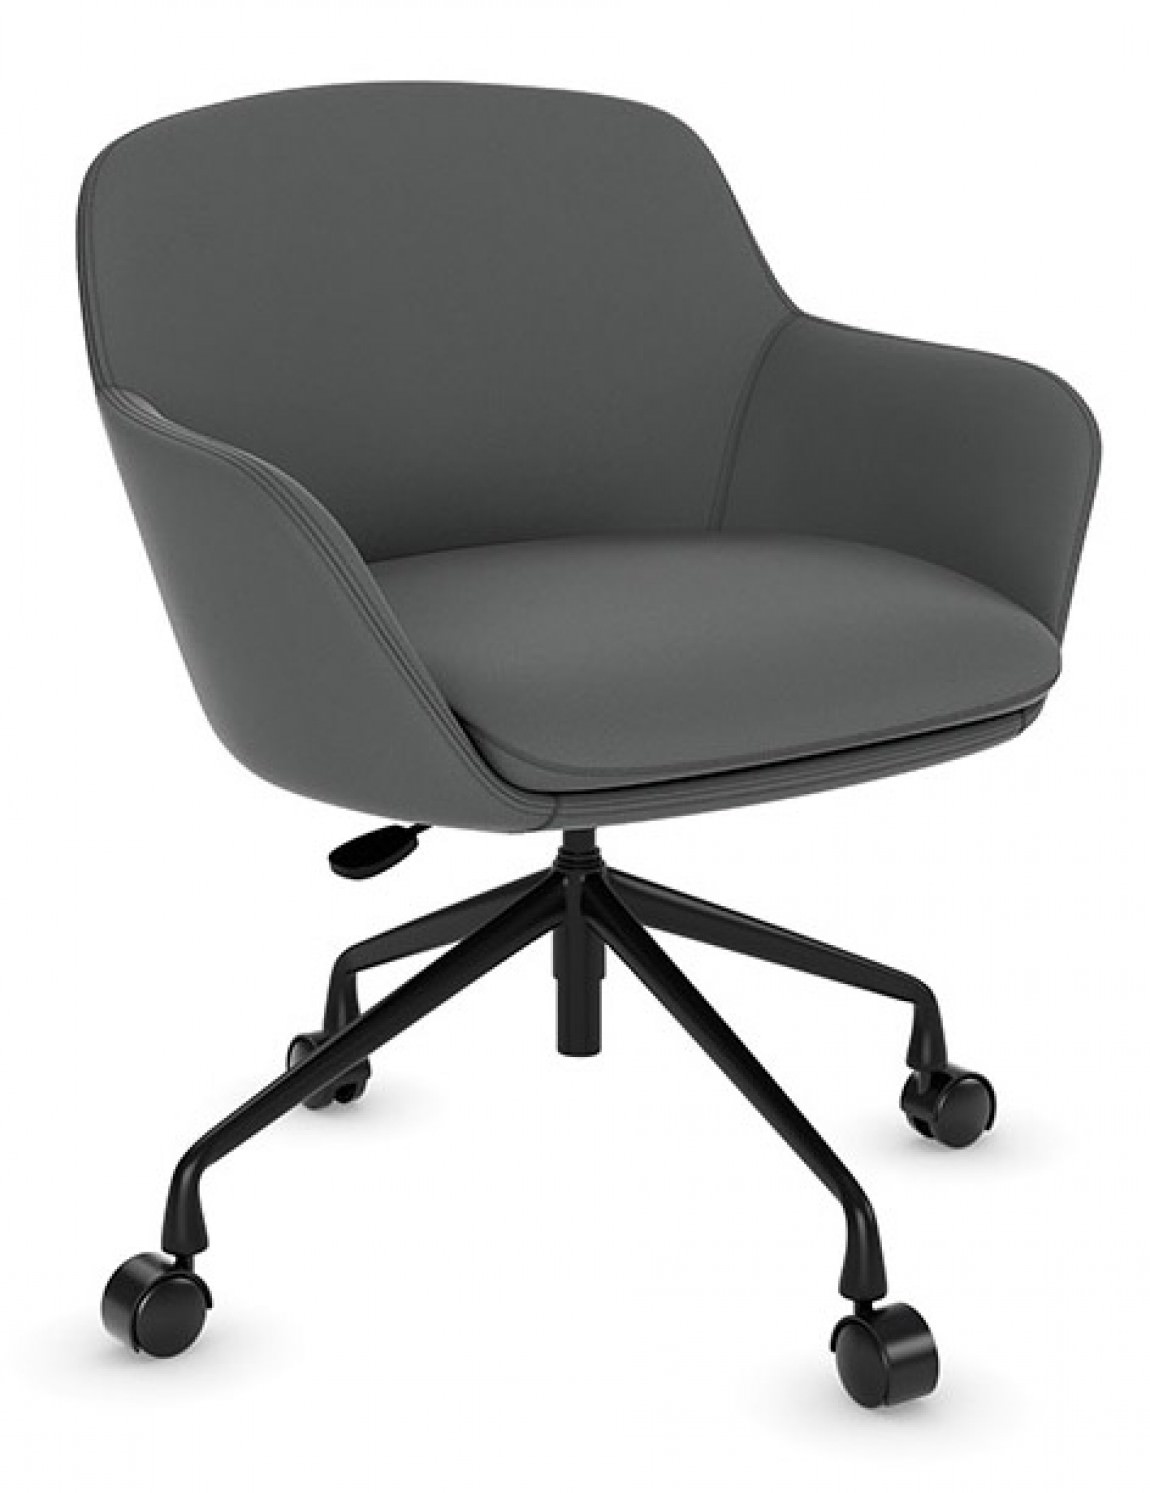 6037 Gray Contemporary Office Chair 1 